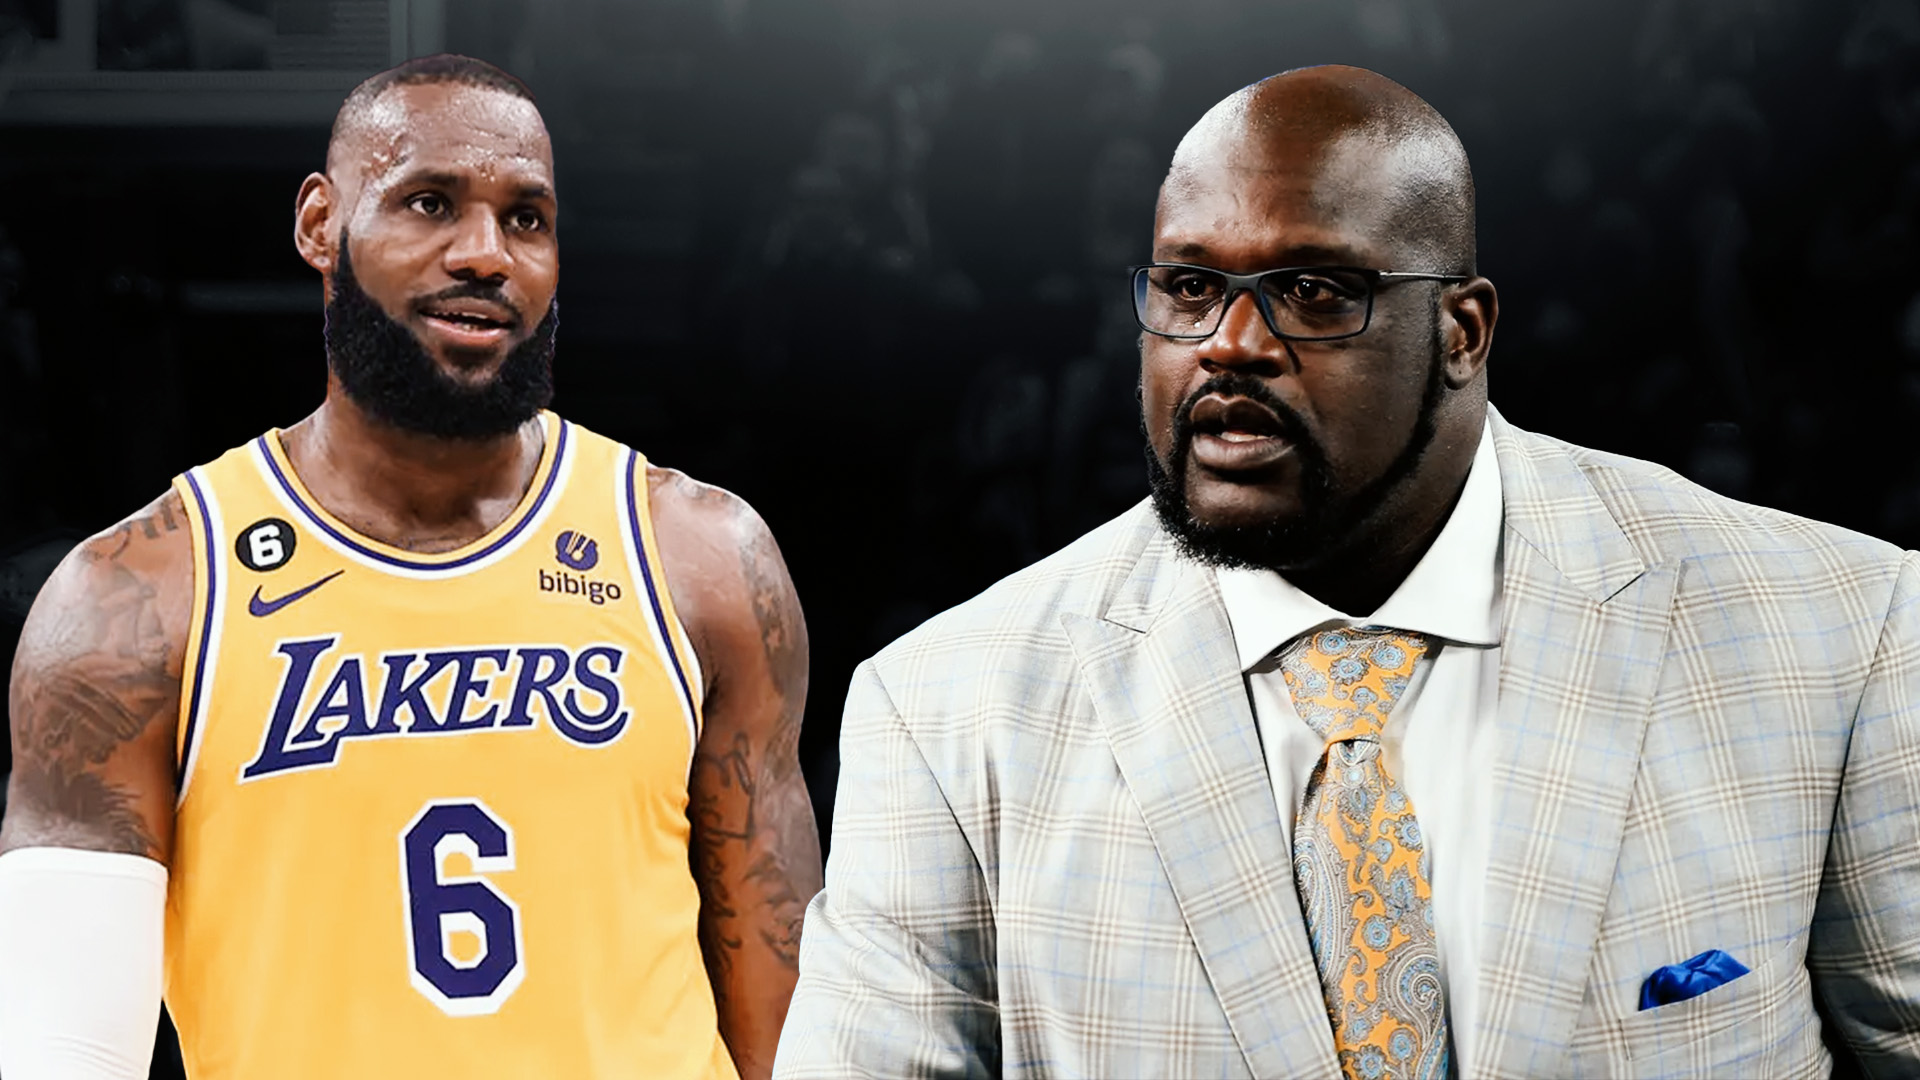 Shaq Puts Lakers Fans on Blast for Their LeBron Criticism